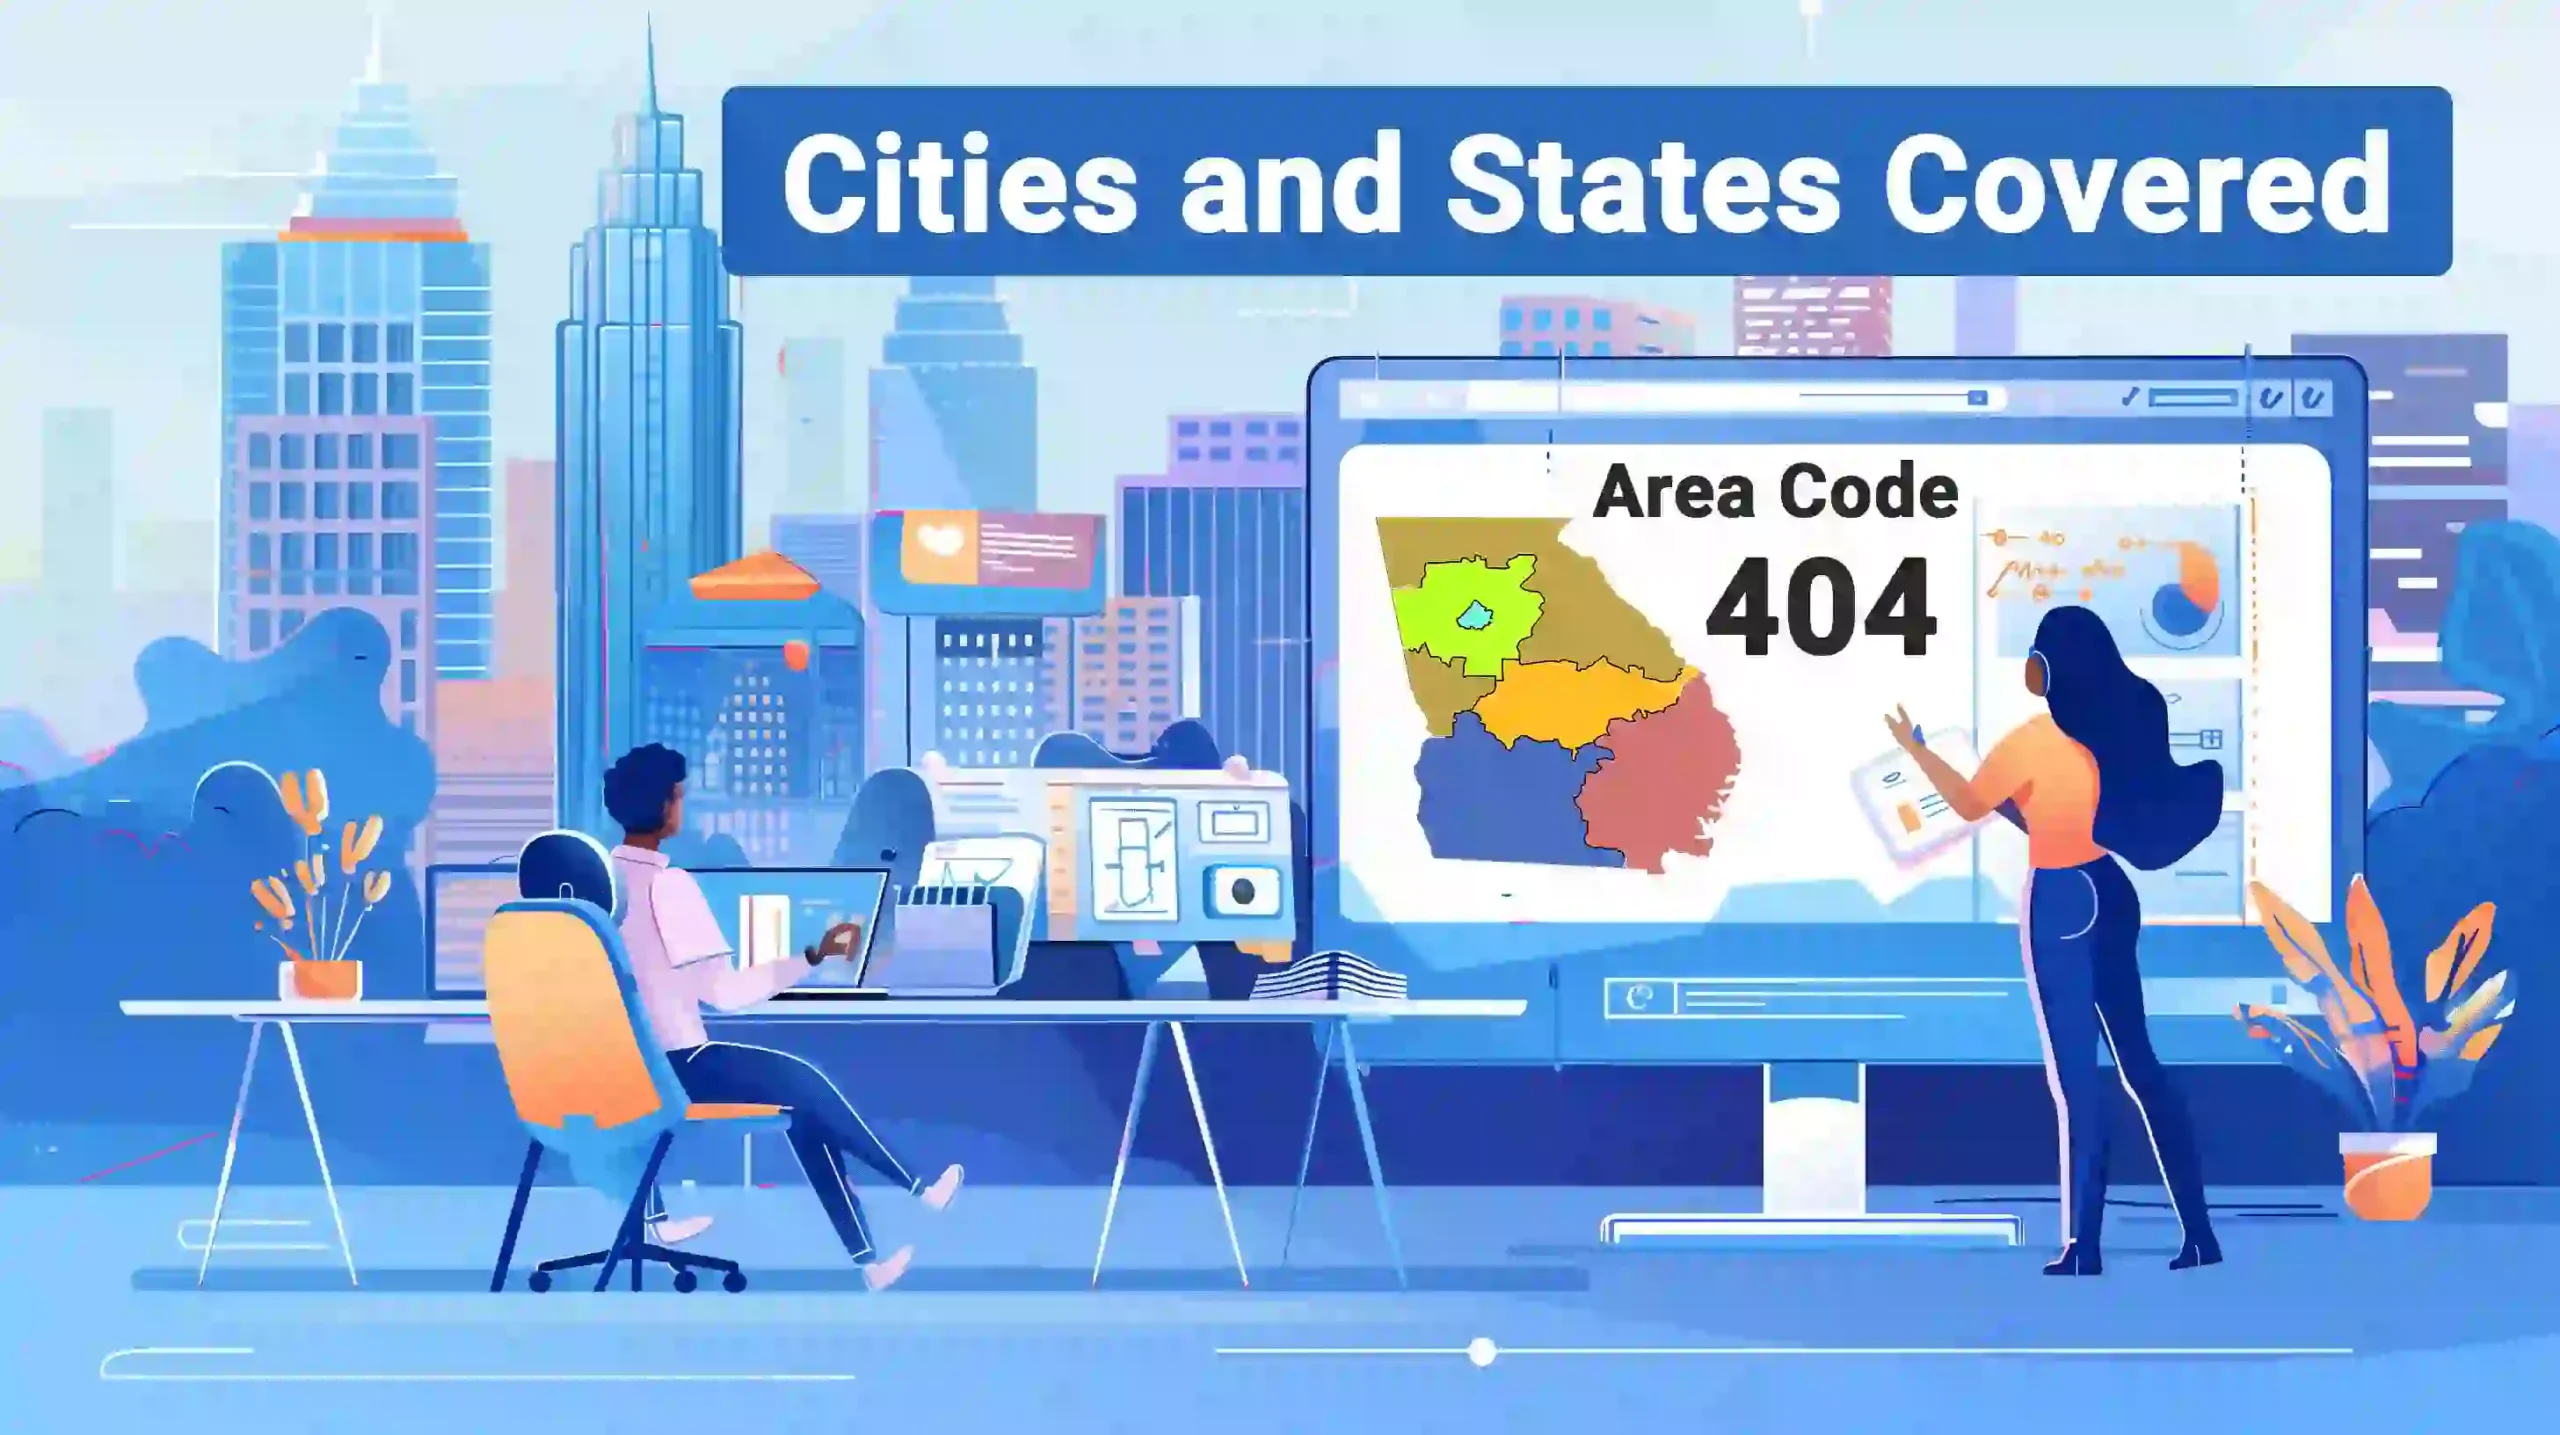 Cities and States Covered by the 404 Area Code